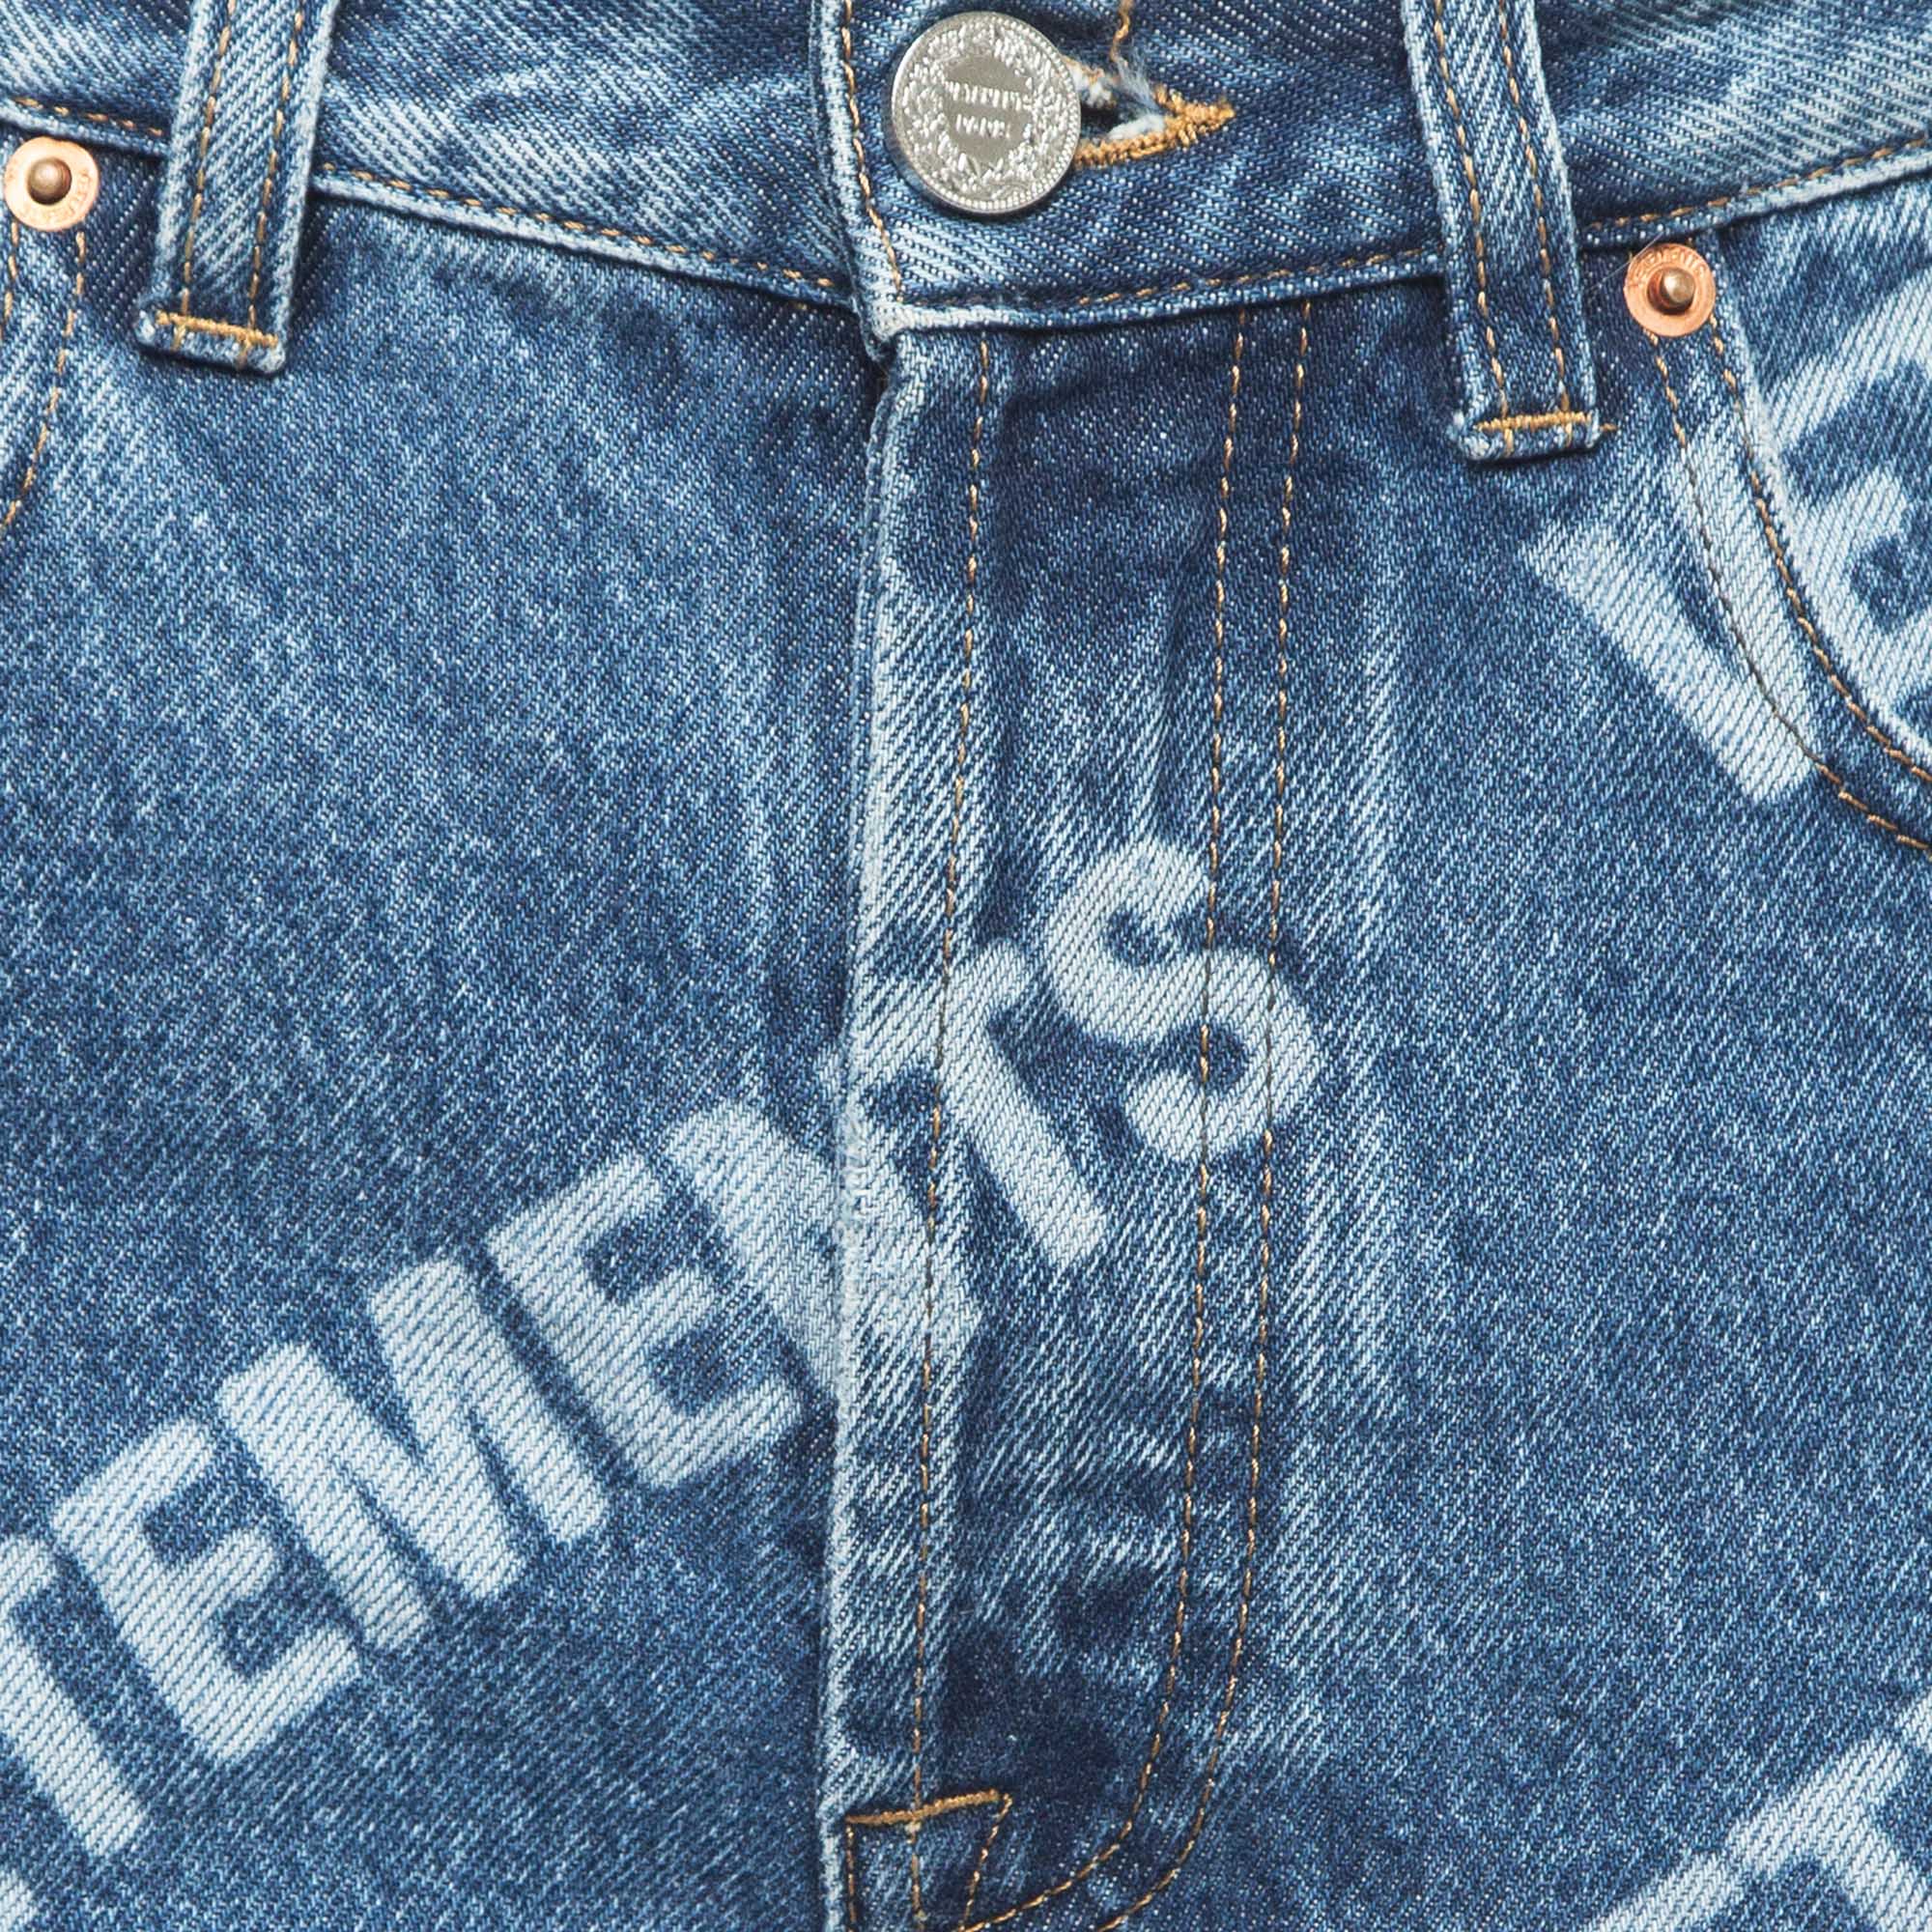 Vetements Blue All-Over Print Washed Denim Jeans S Waist 27